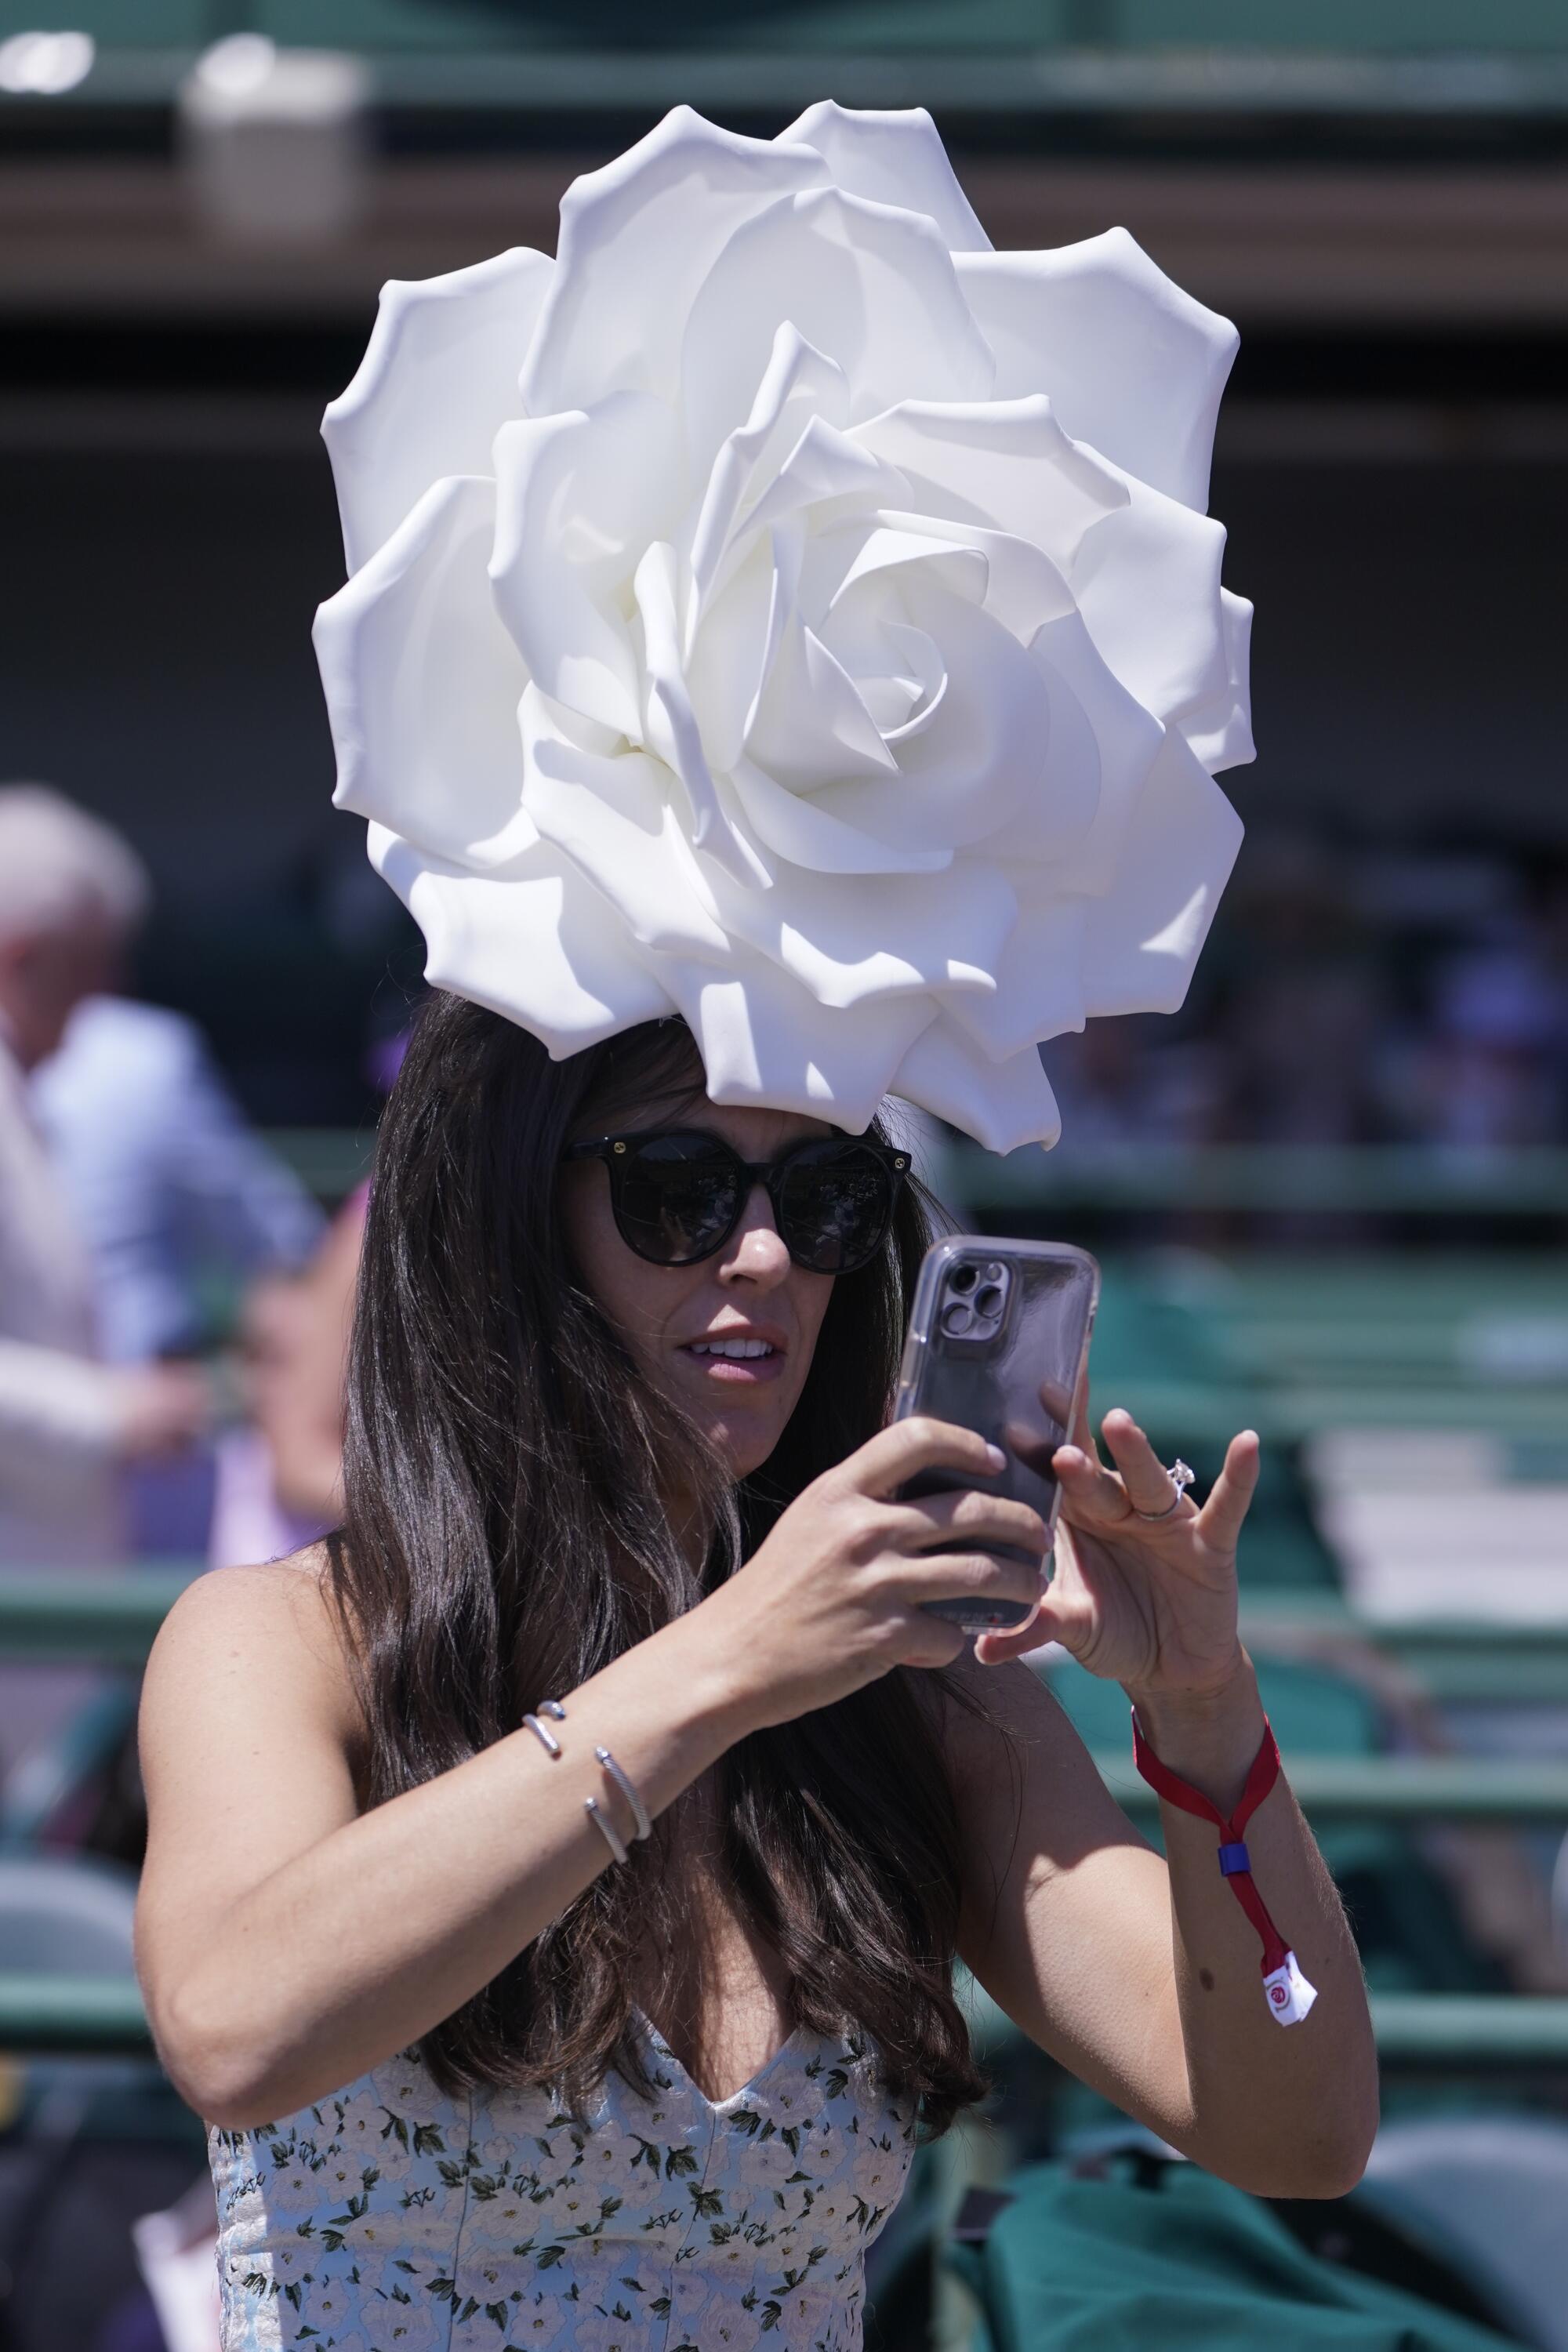 A woman takes a photo while wearing a large white rose-shaped hat.